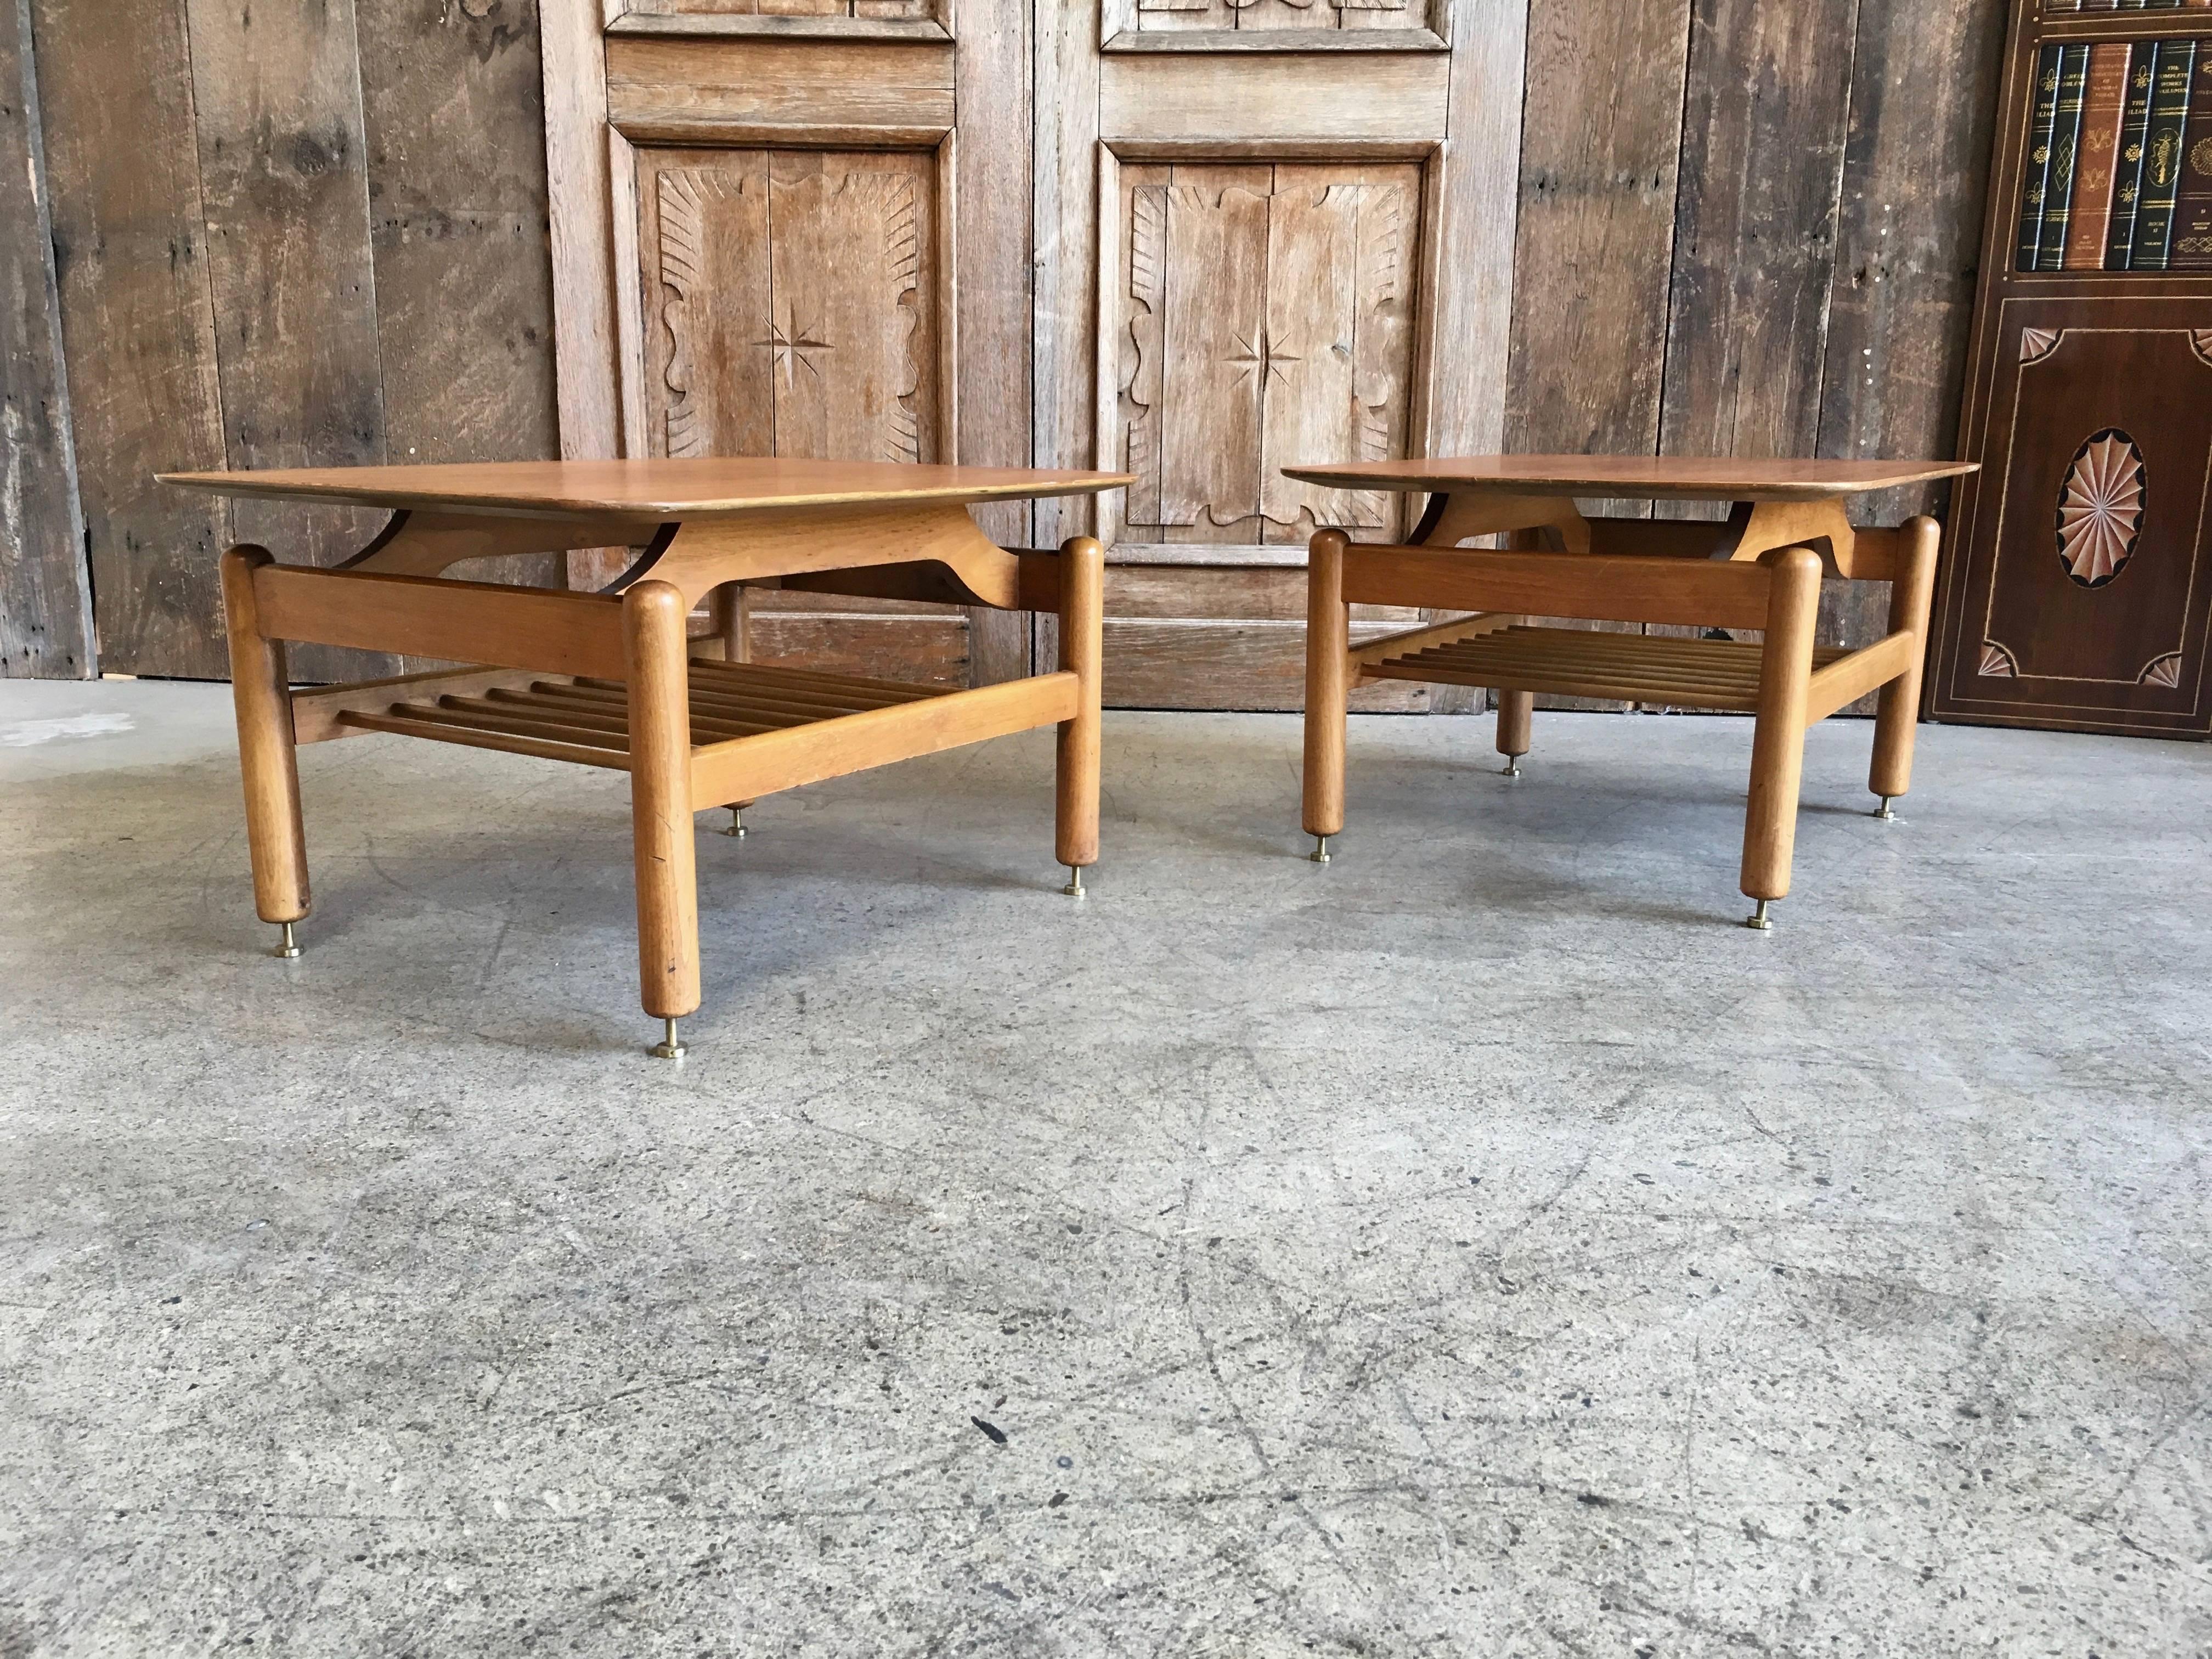 A very nice pair of walnut side tables designed by Greta Grossman for Glenn of California in the 1950s. Original finish.